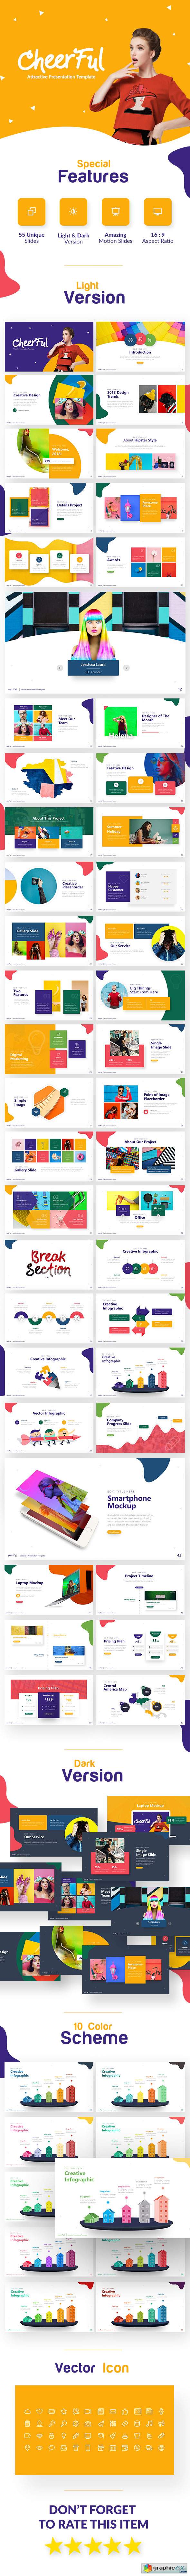 Cheerful - Attractive Powerpoint Template